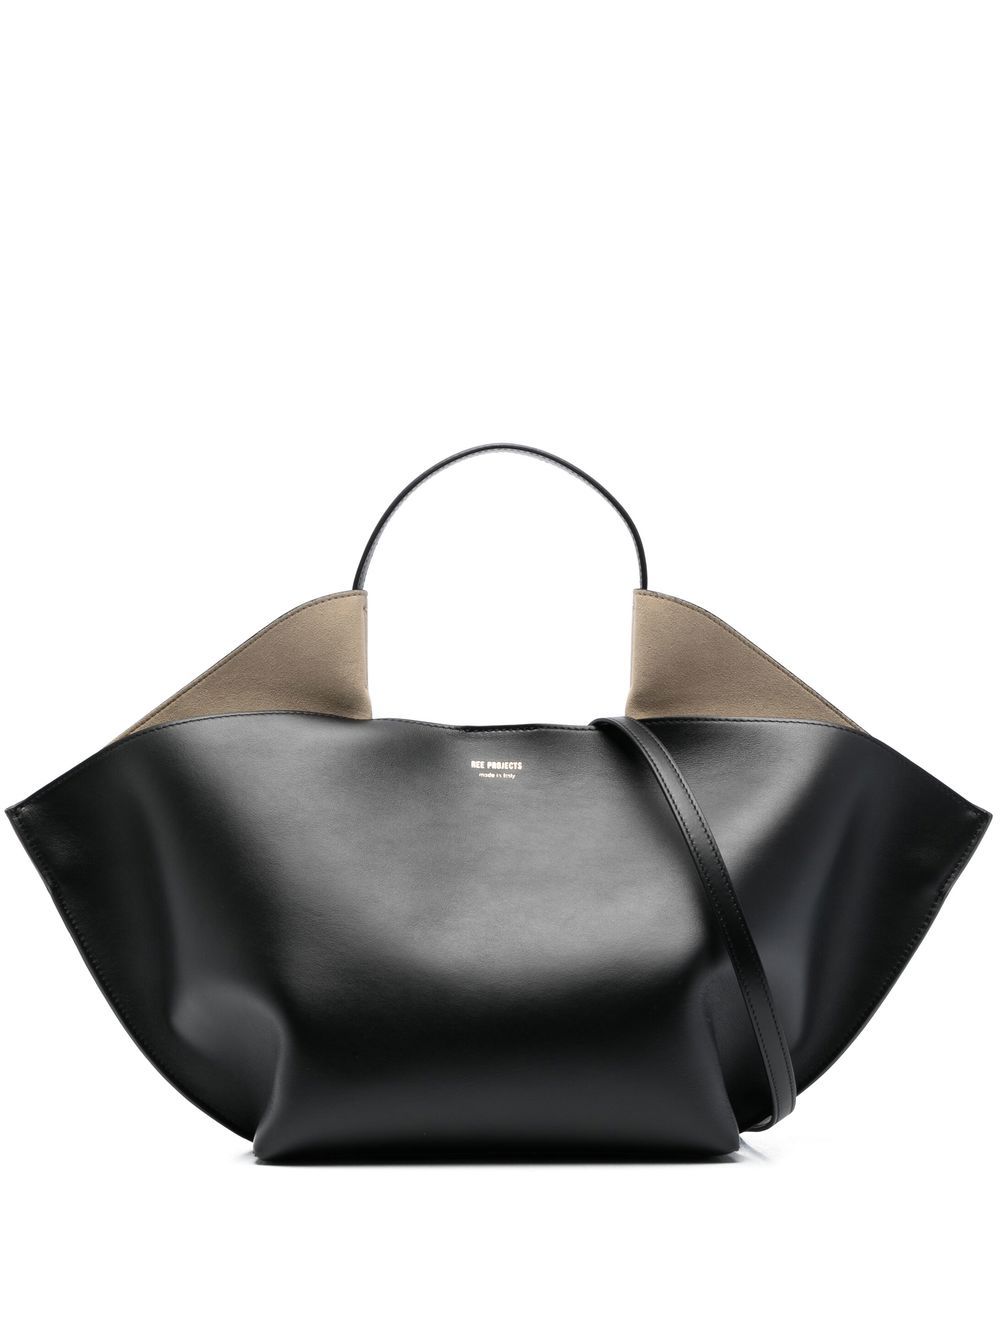 REE PROJECTS medium Ann leather tote bag - Black von REE PROJECTS